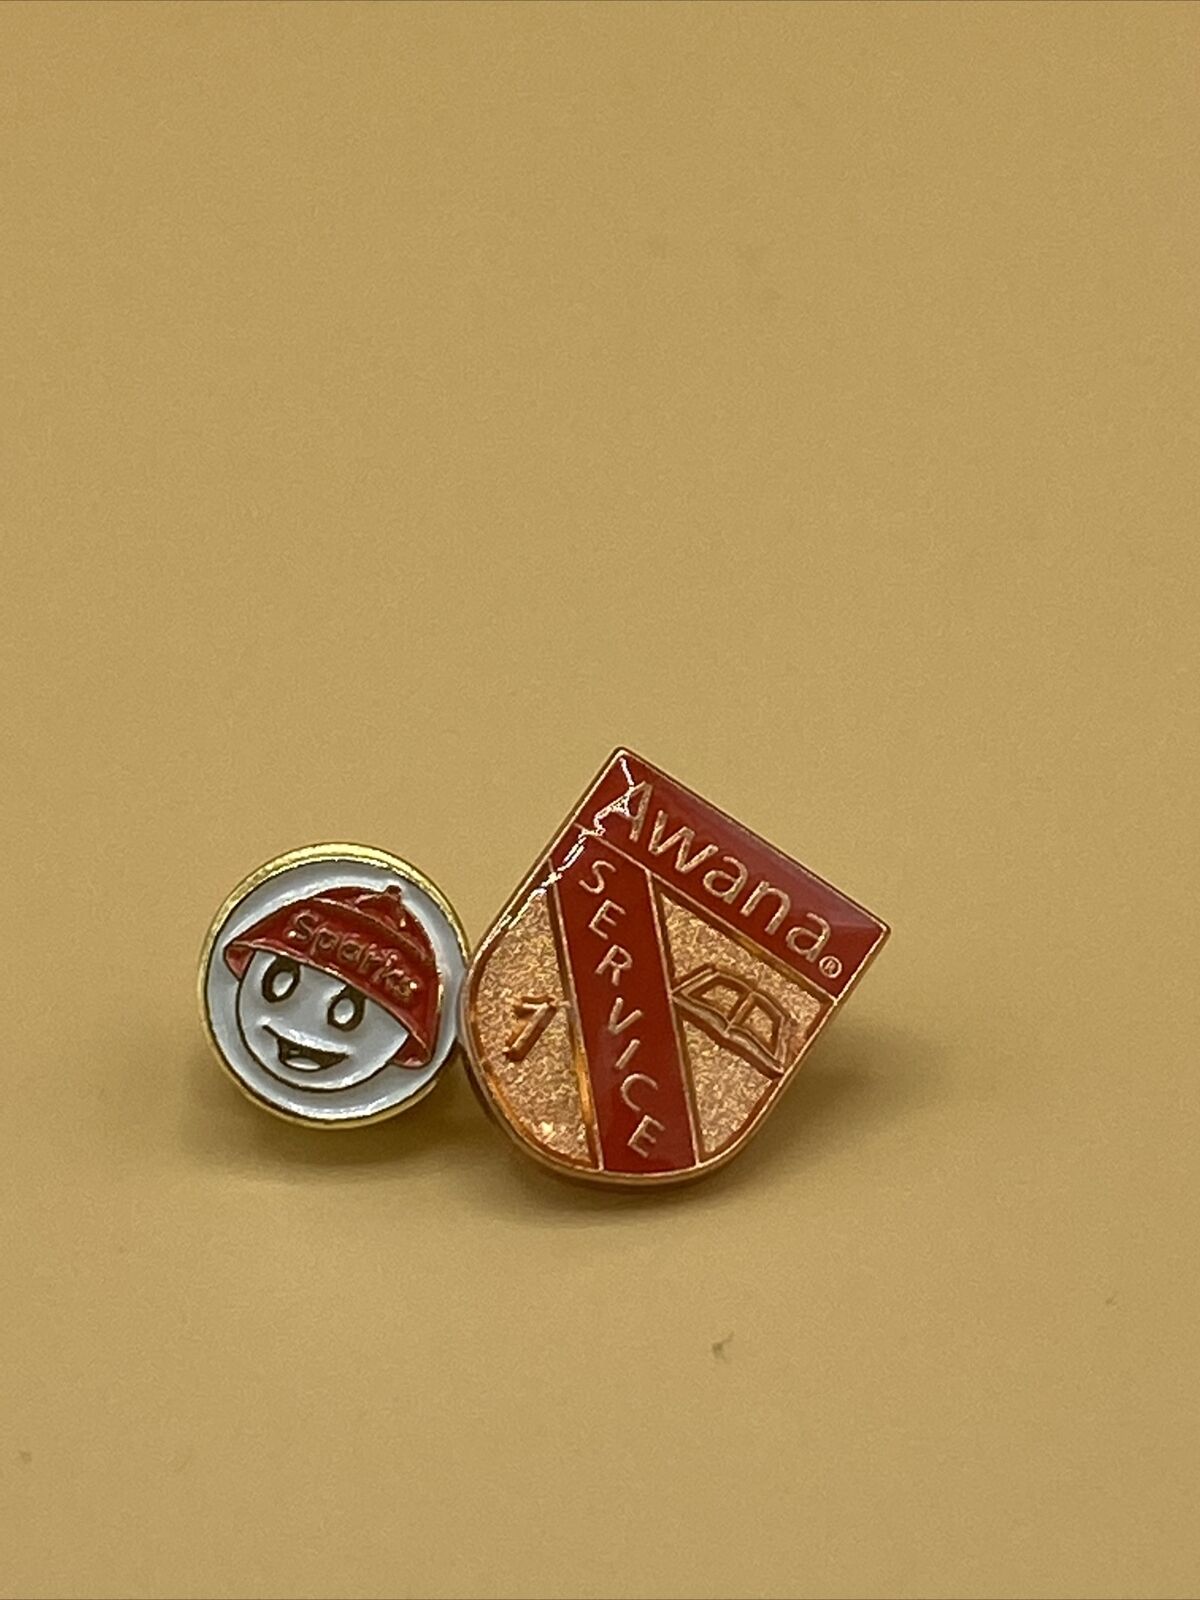 vintage Awanas pins lot of 2 - sparks - sparky service pin